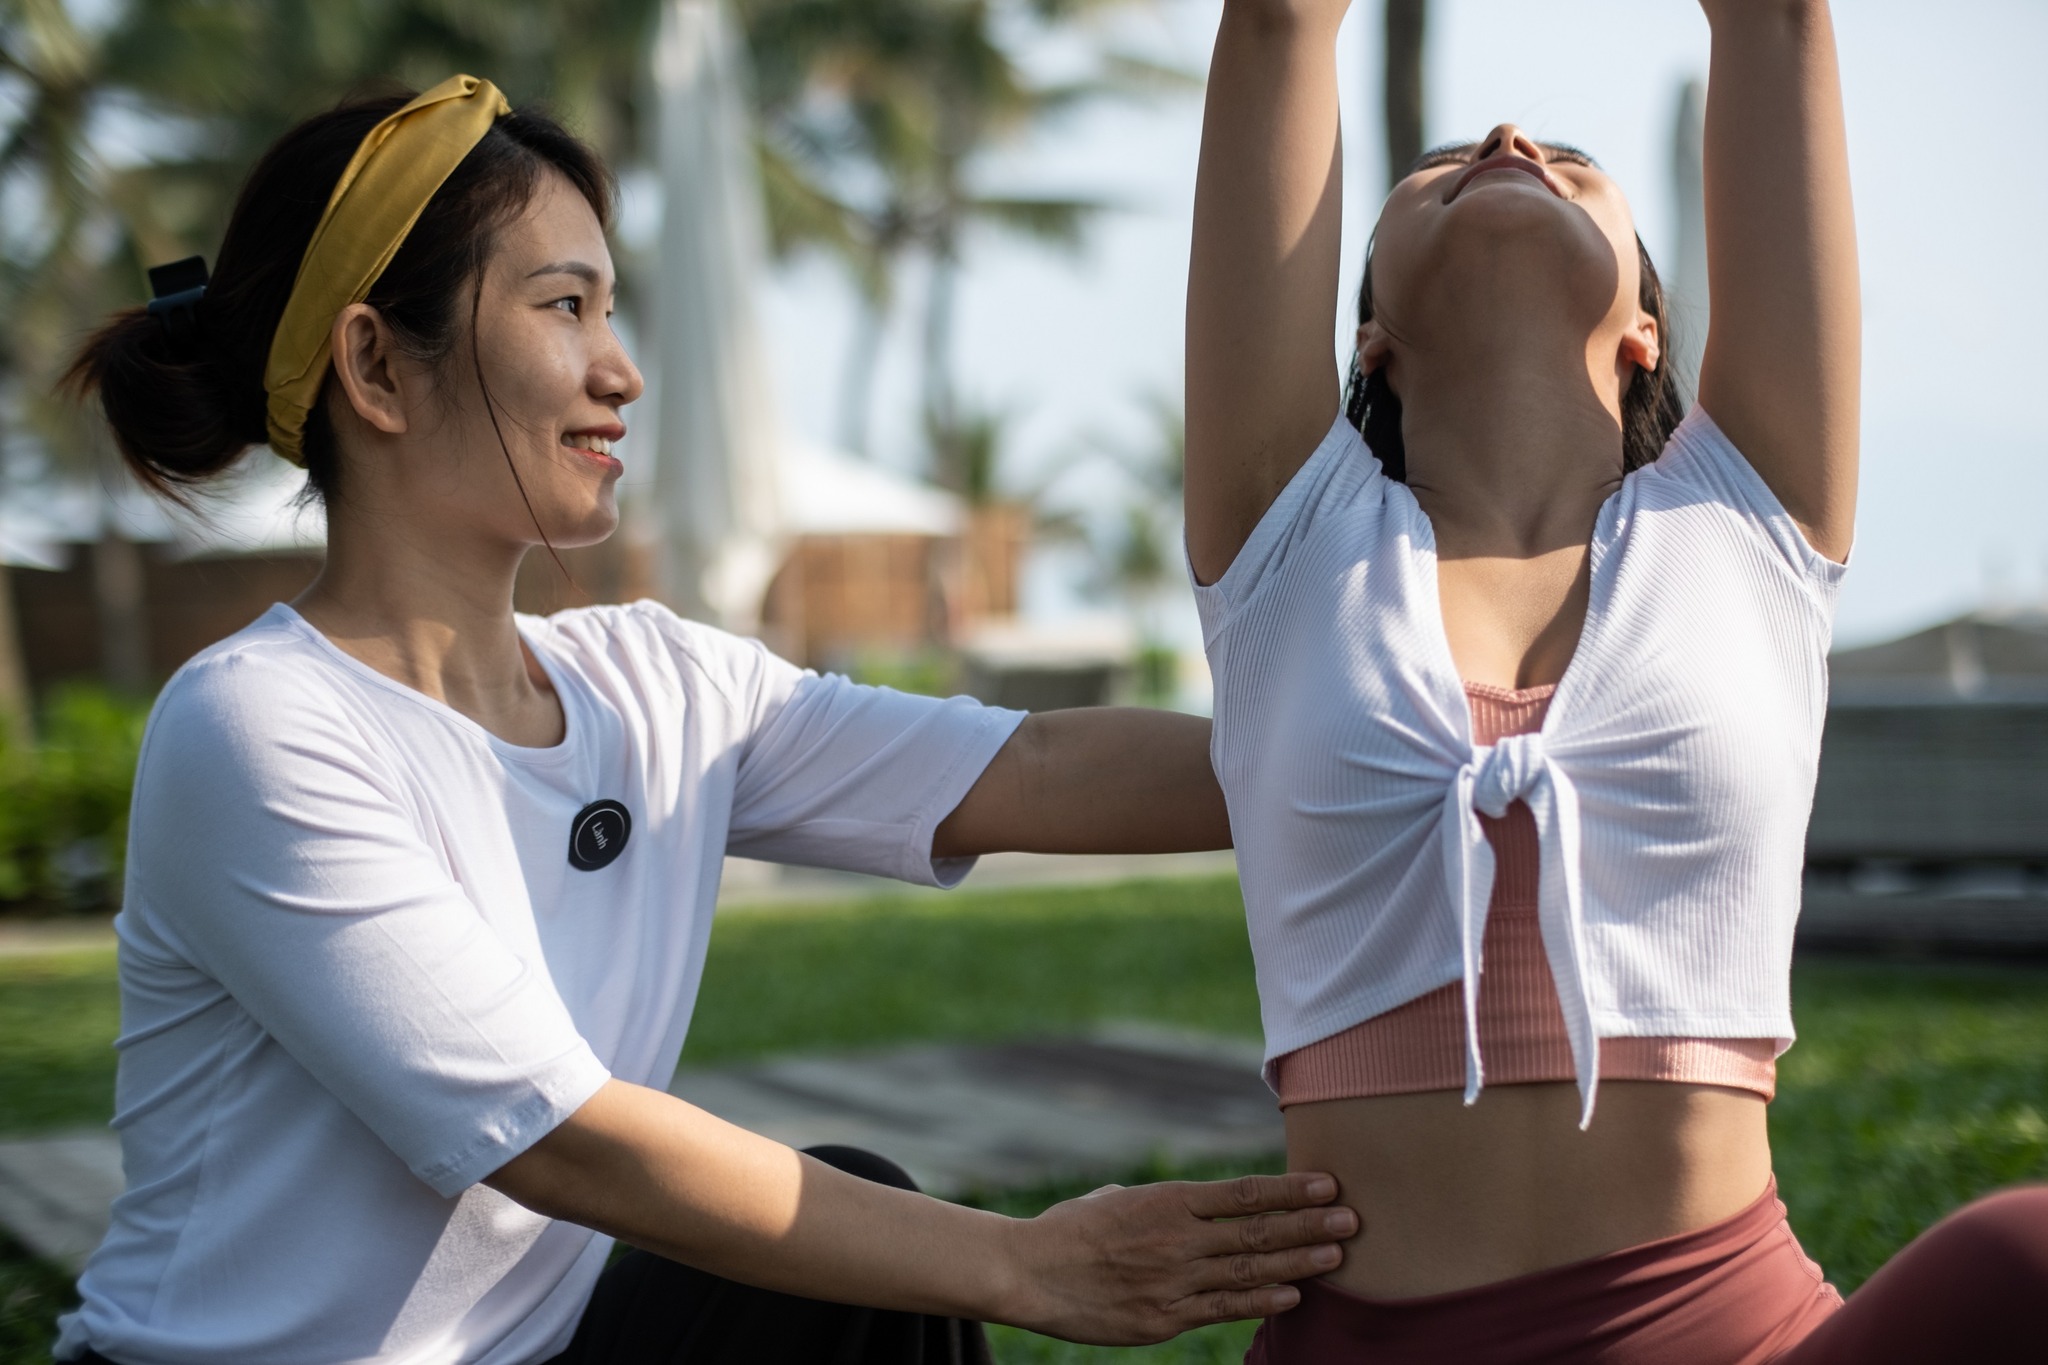 We talk wellness and travel with concierge and wellness manager Tran Ly Du of TIA Wellness Resort.